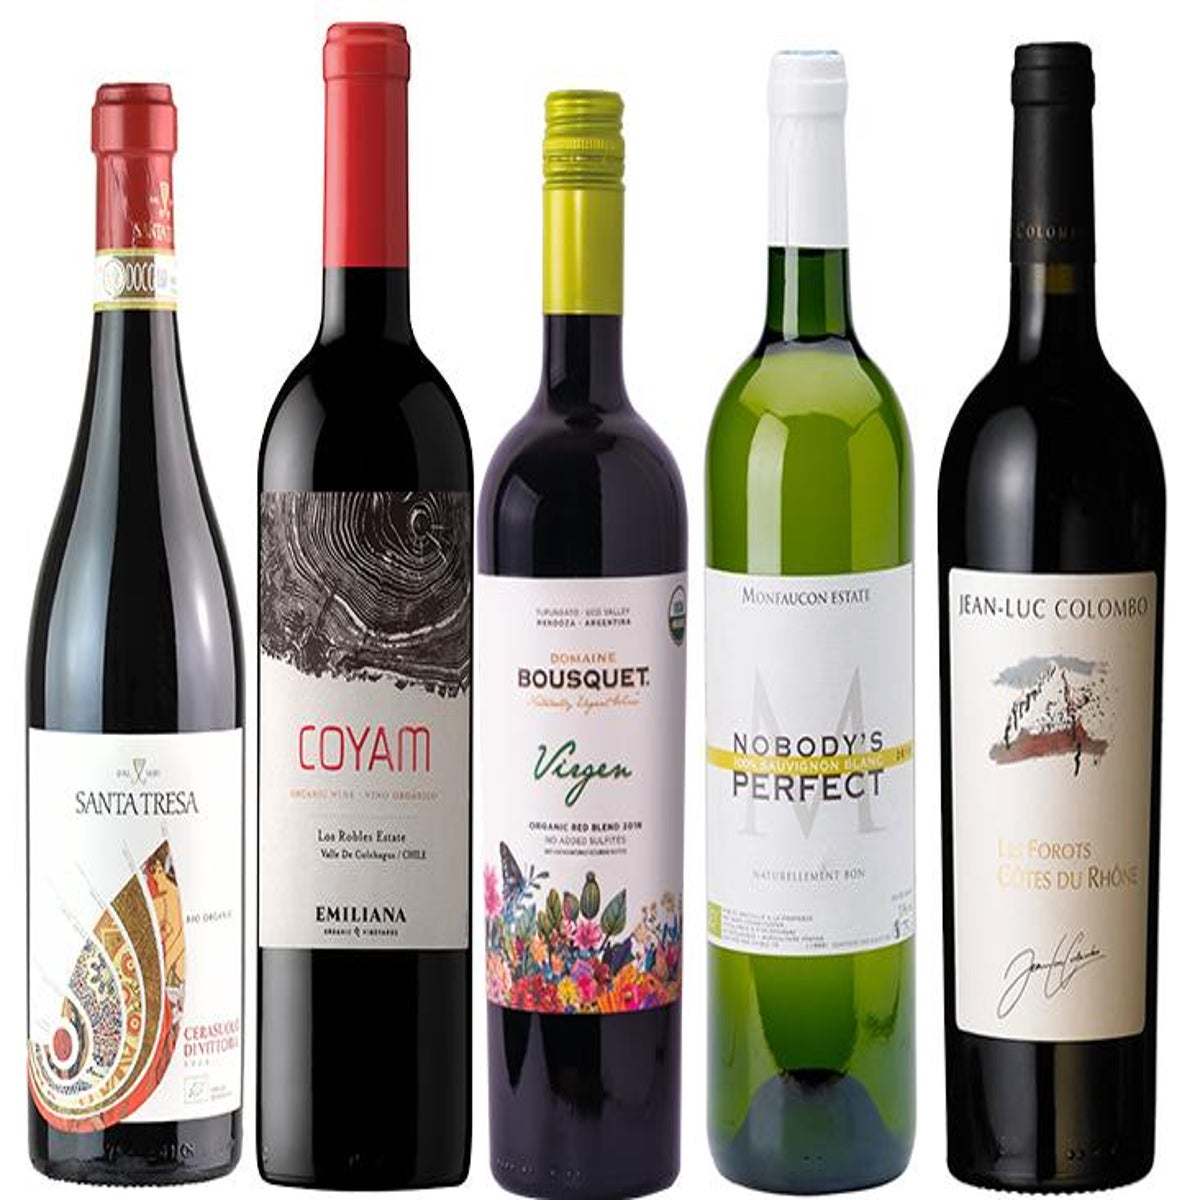 https://static.independent.co.uk/s3fs-public/thumbnails/image/2020/09/04/12/wines.jpg?width=1200&height=1200&fit=crop